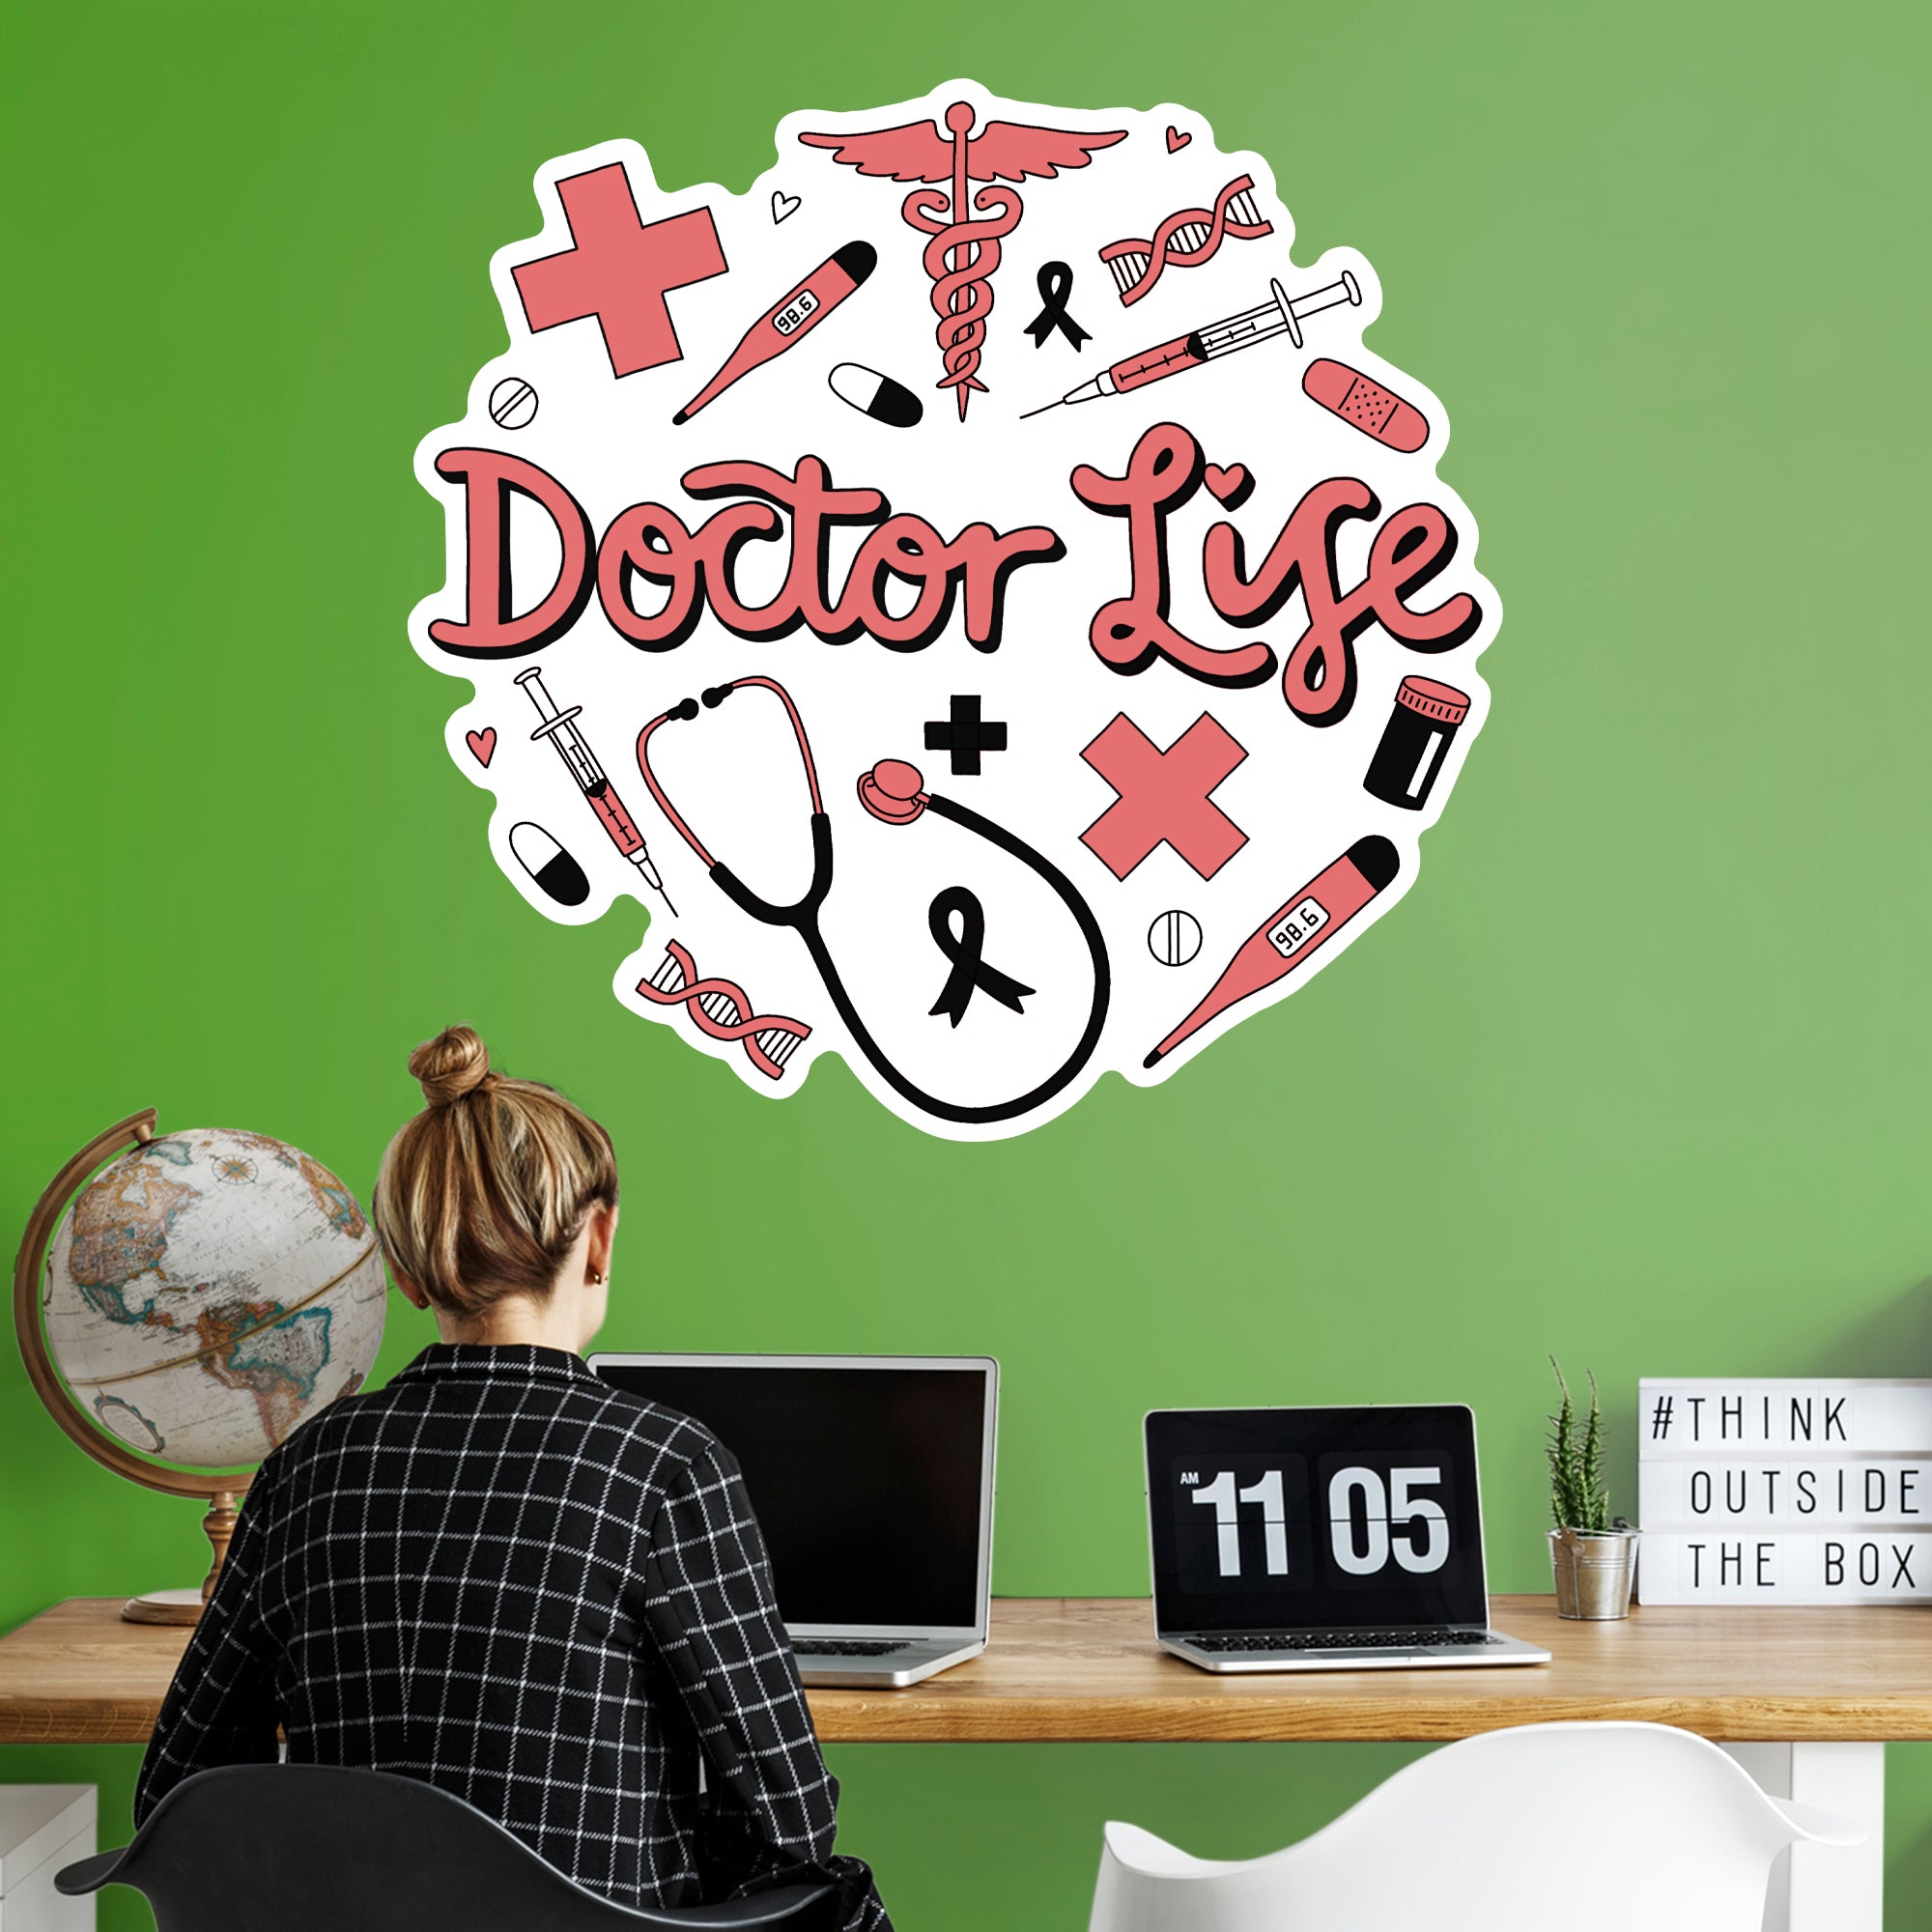 Doctor Life - Officially Licensed Big Moods Removable Wall Decal Giant Decal (37"W x 38"H) by Fathead | Vinyl